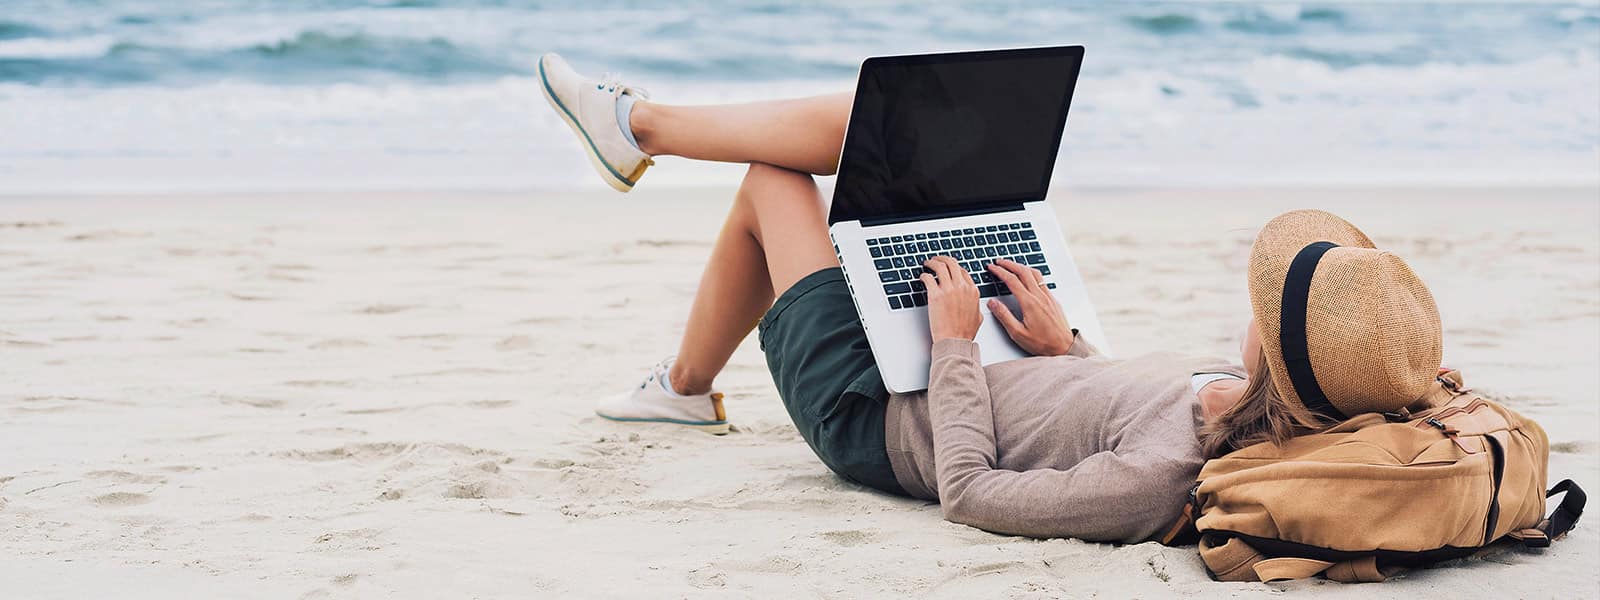 woman wearing a hat, laying on the beach with her laptop and backpack.